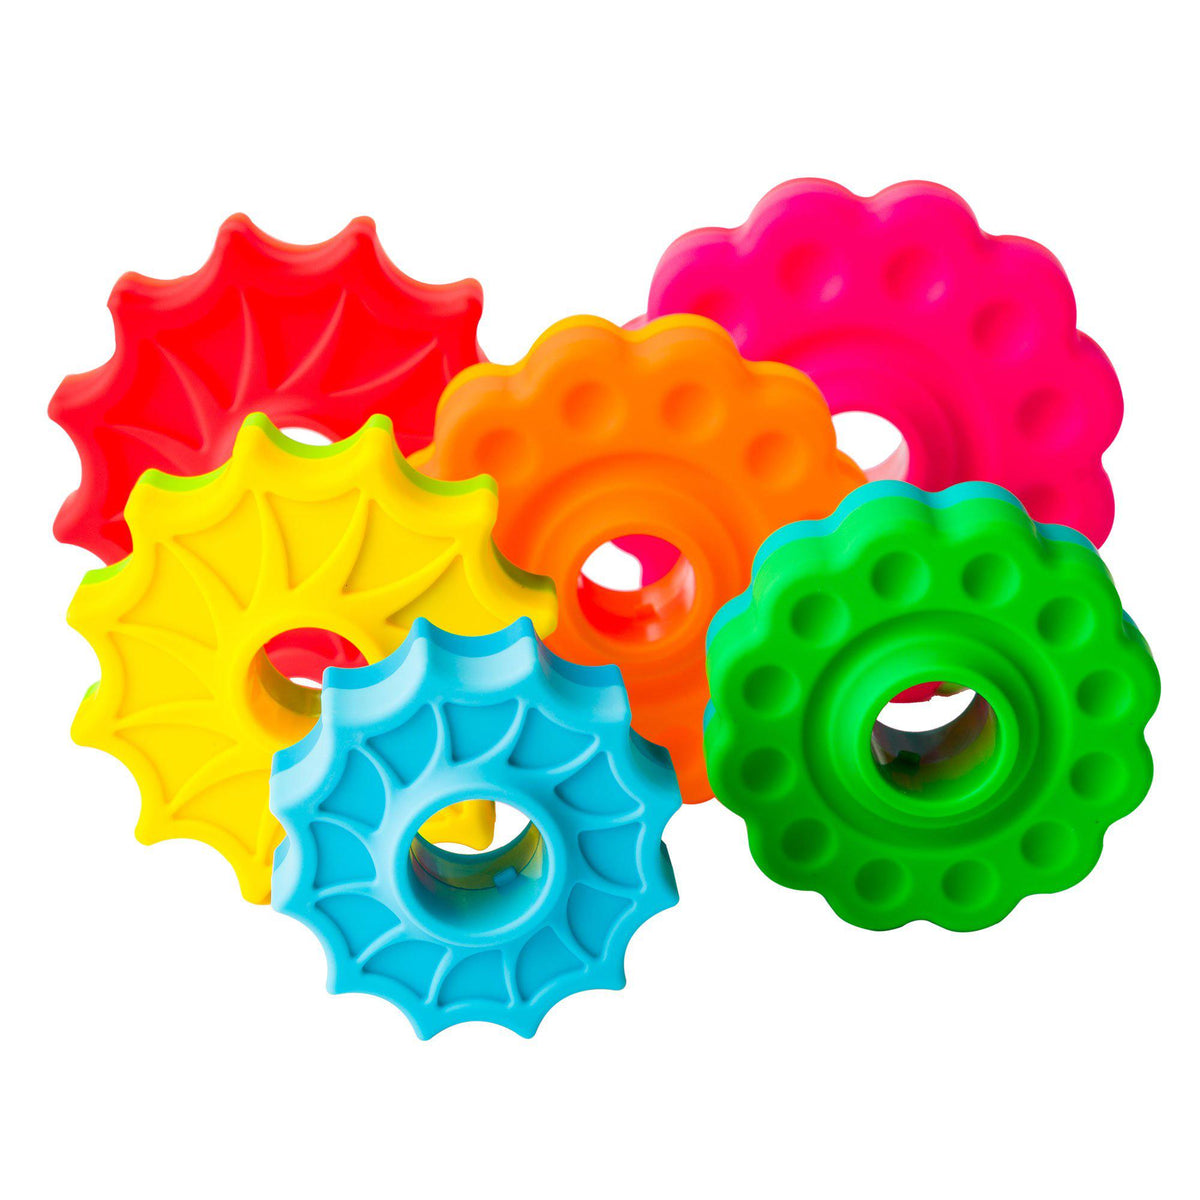 6 different discs with varied colors, shapes, and sizes